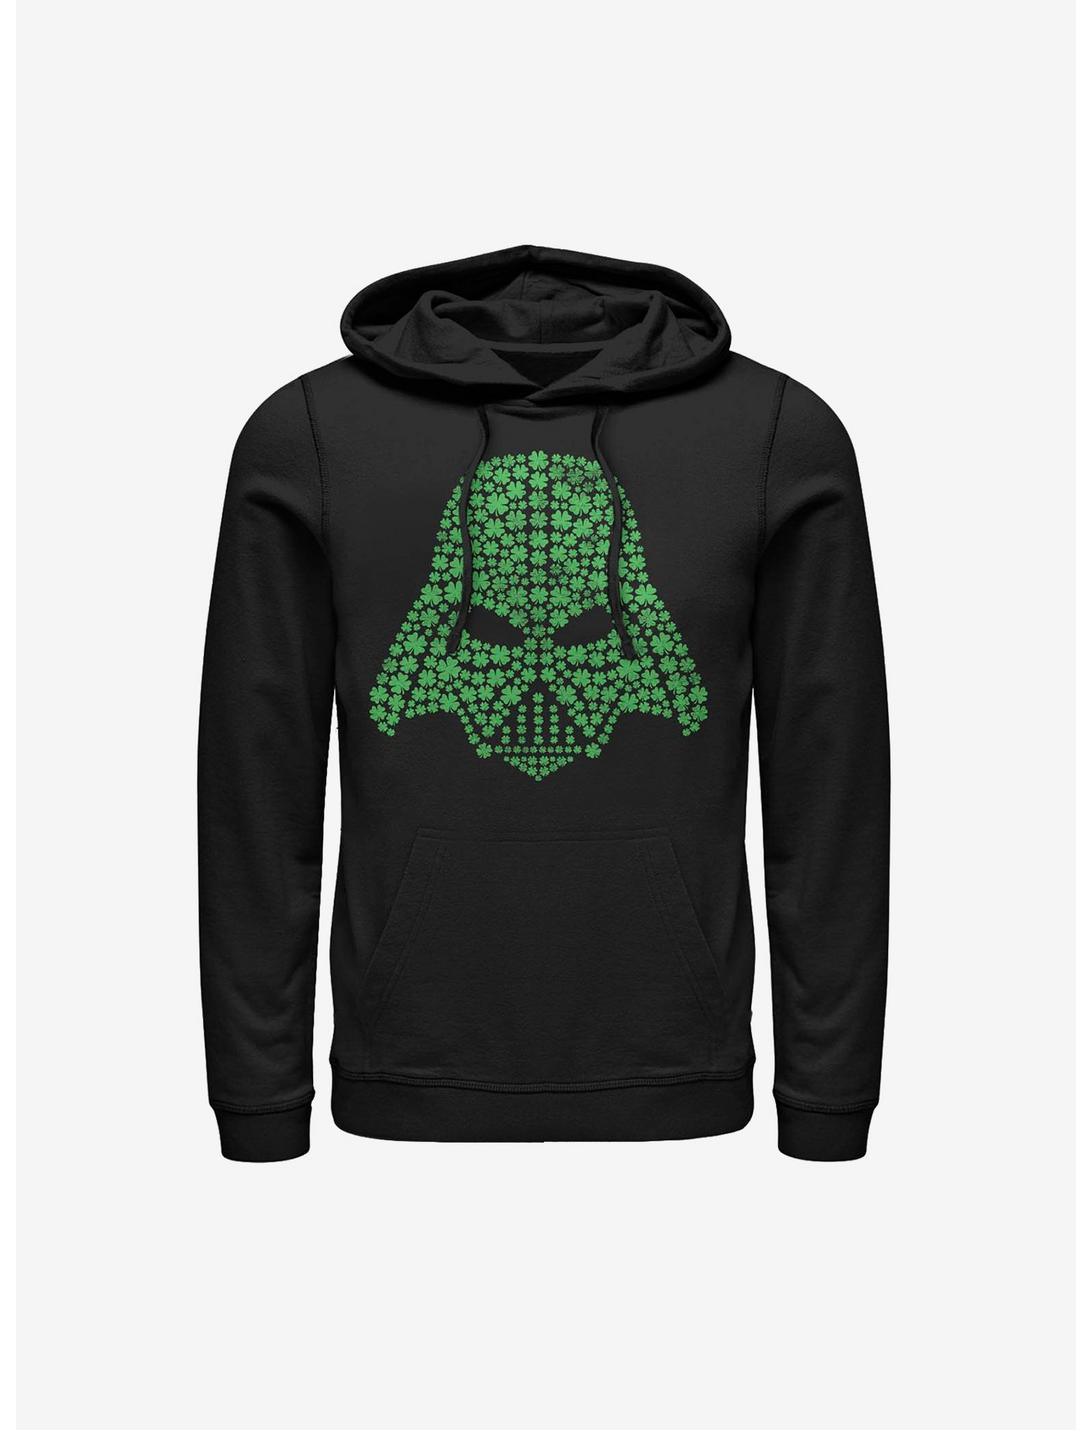 Star Wars Sith Out Of Luck Hoodie, BLACK, hi-res